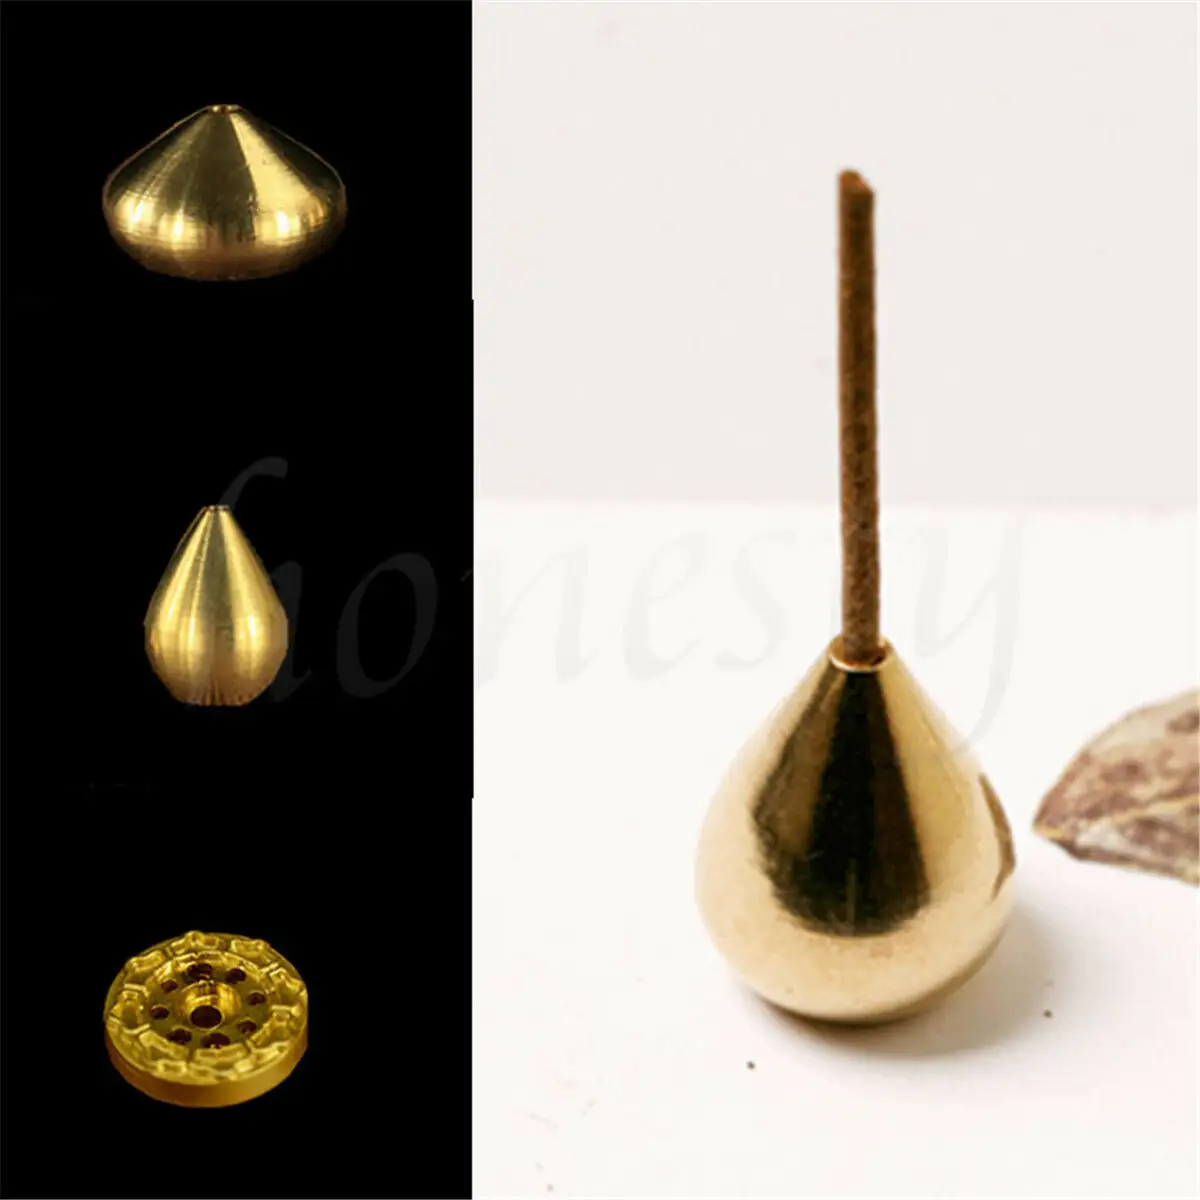 Brass Inserted Portable Mini Burner Holder with Base Incense Aromatherapy Environment